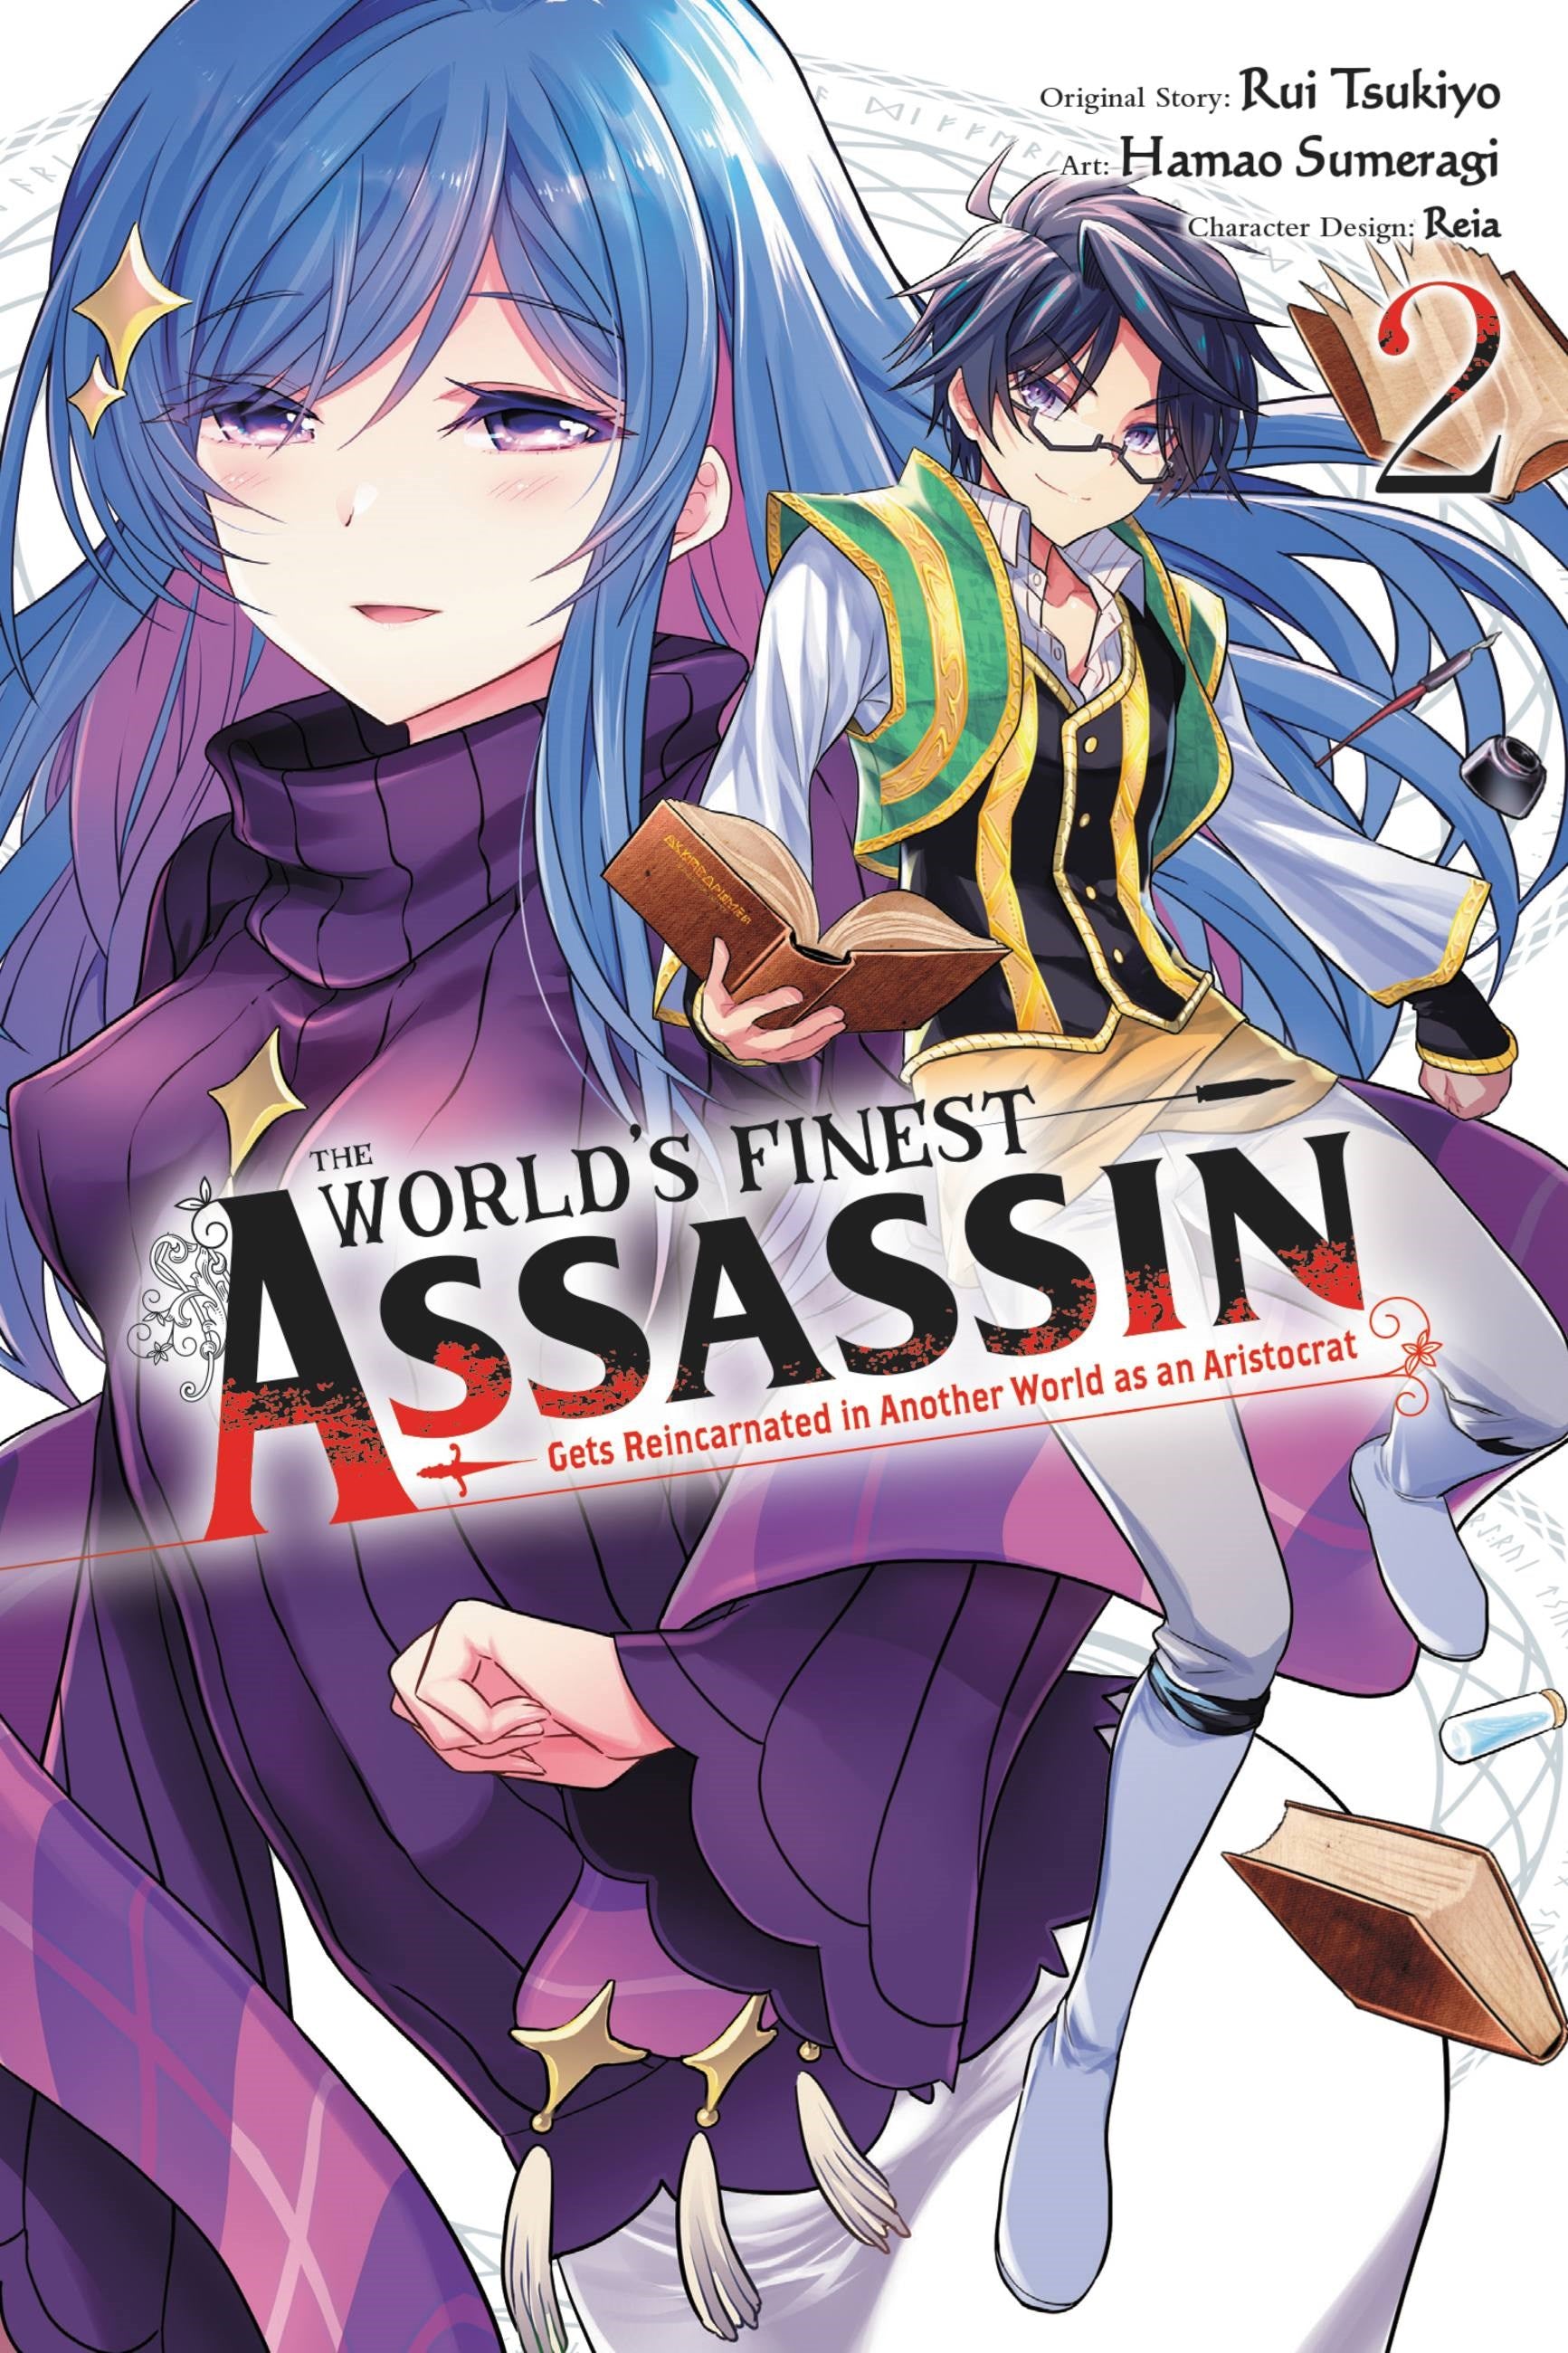 The World's Finest Assassin Gets Reincarnated in Another World as an Aristocrat (Manga) Vol. 02